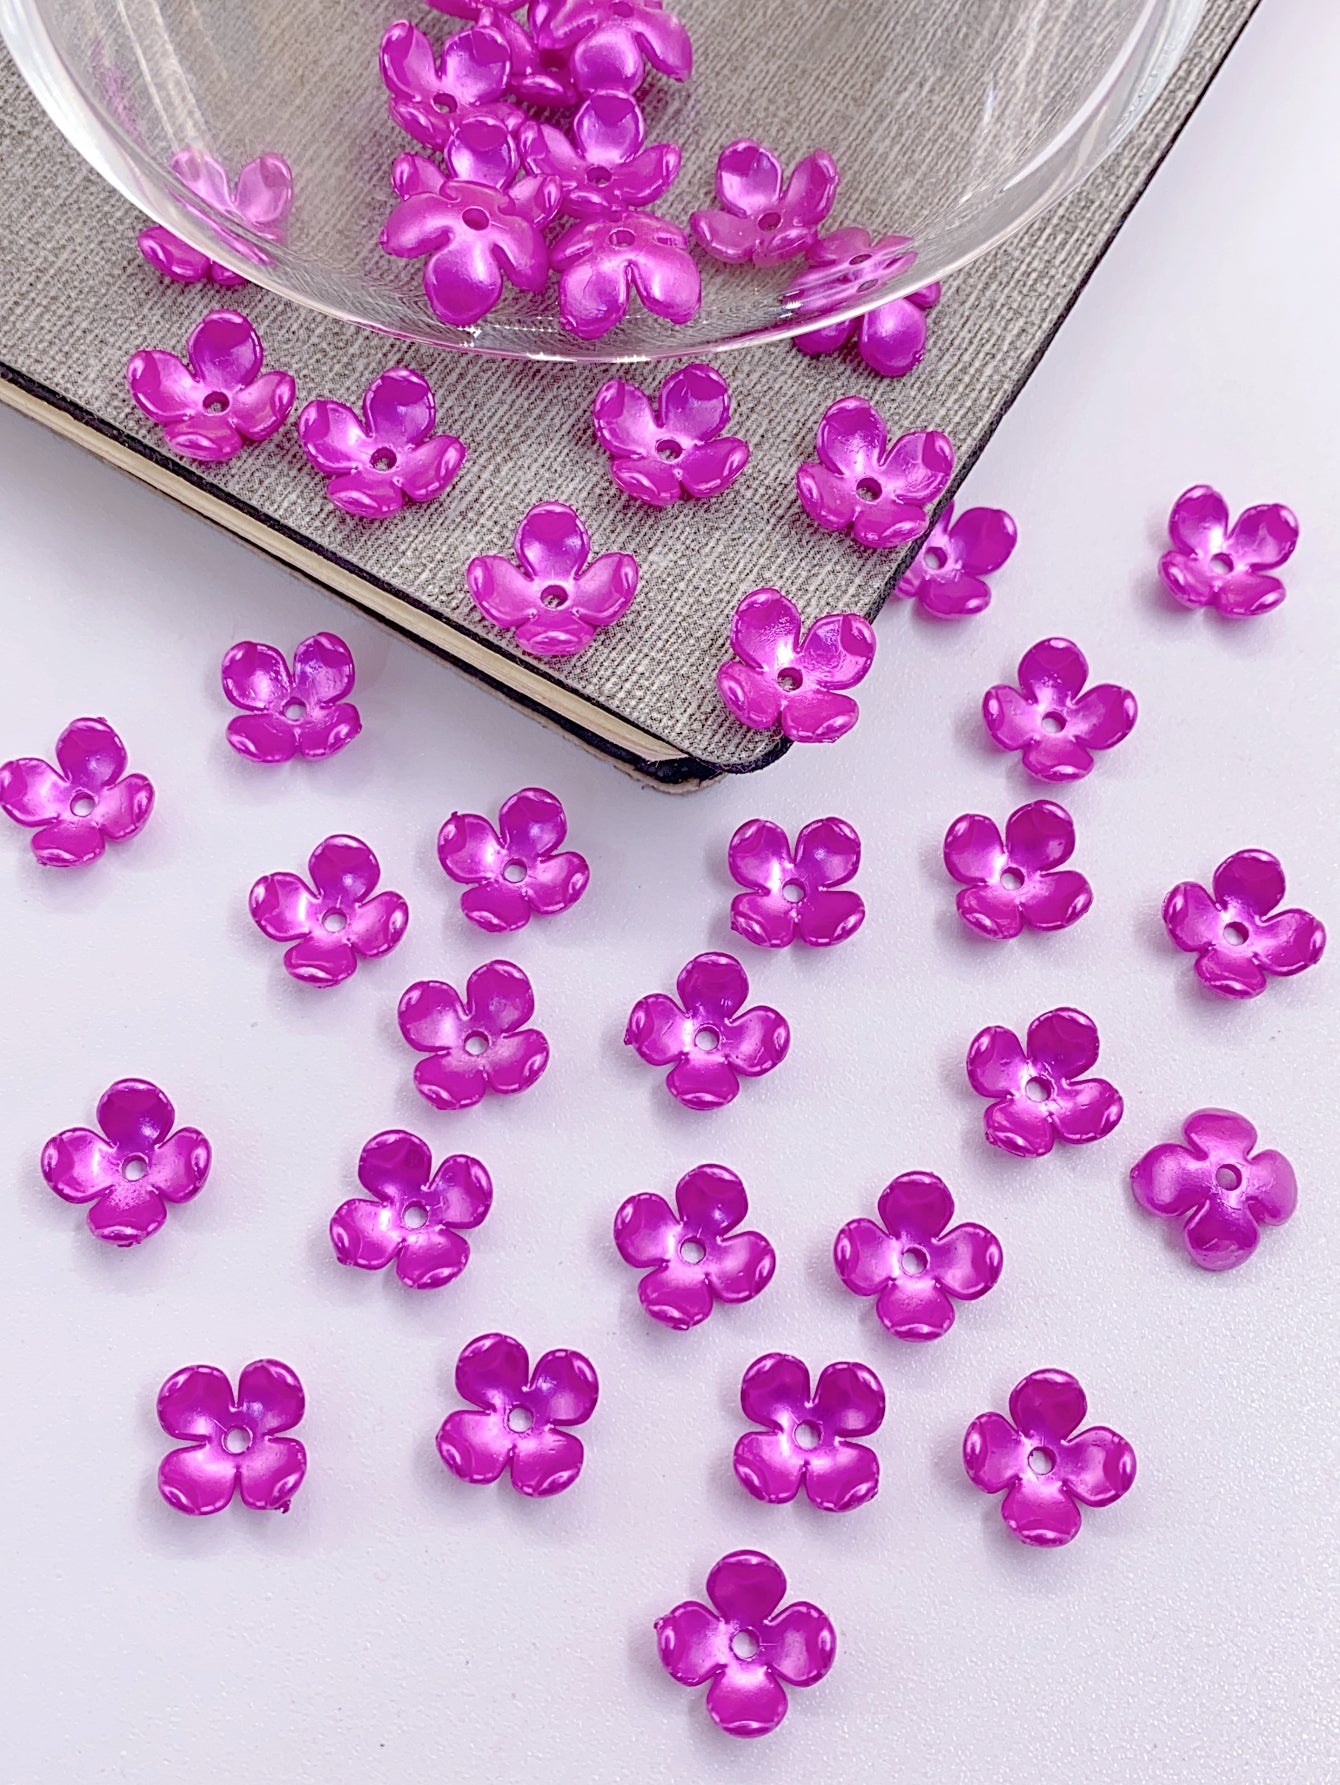 New ABS imitation pearl small four-petal flower straight hole colorful pearl diy headwear accessories beads